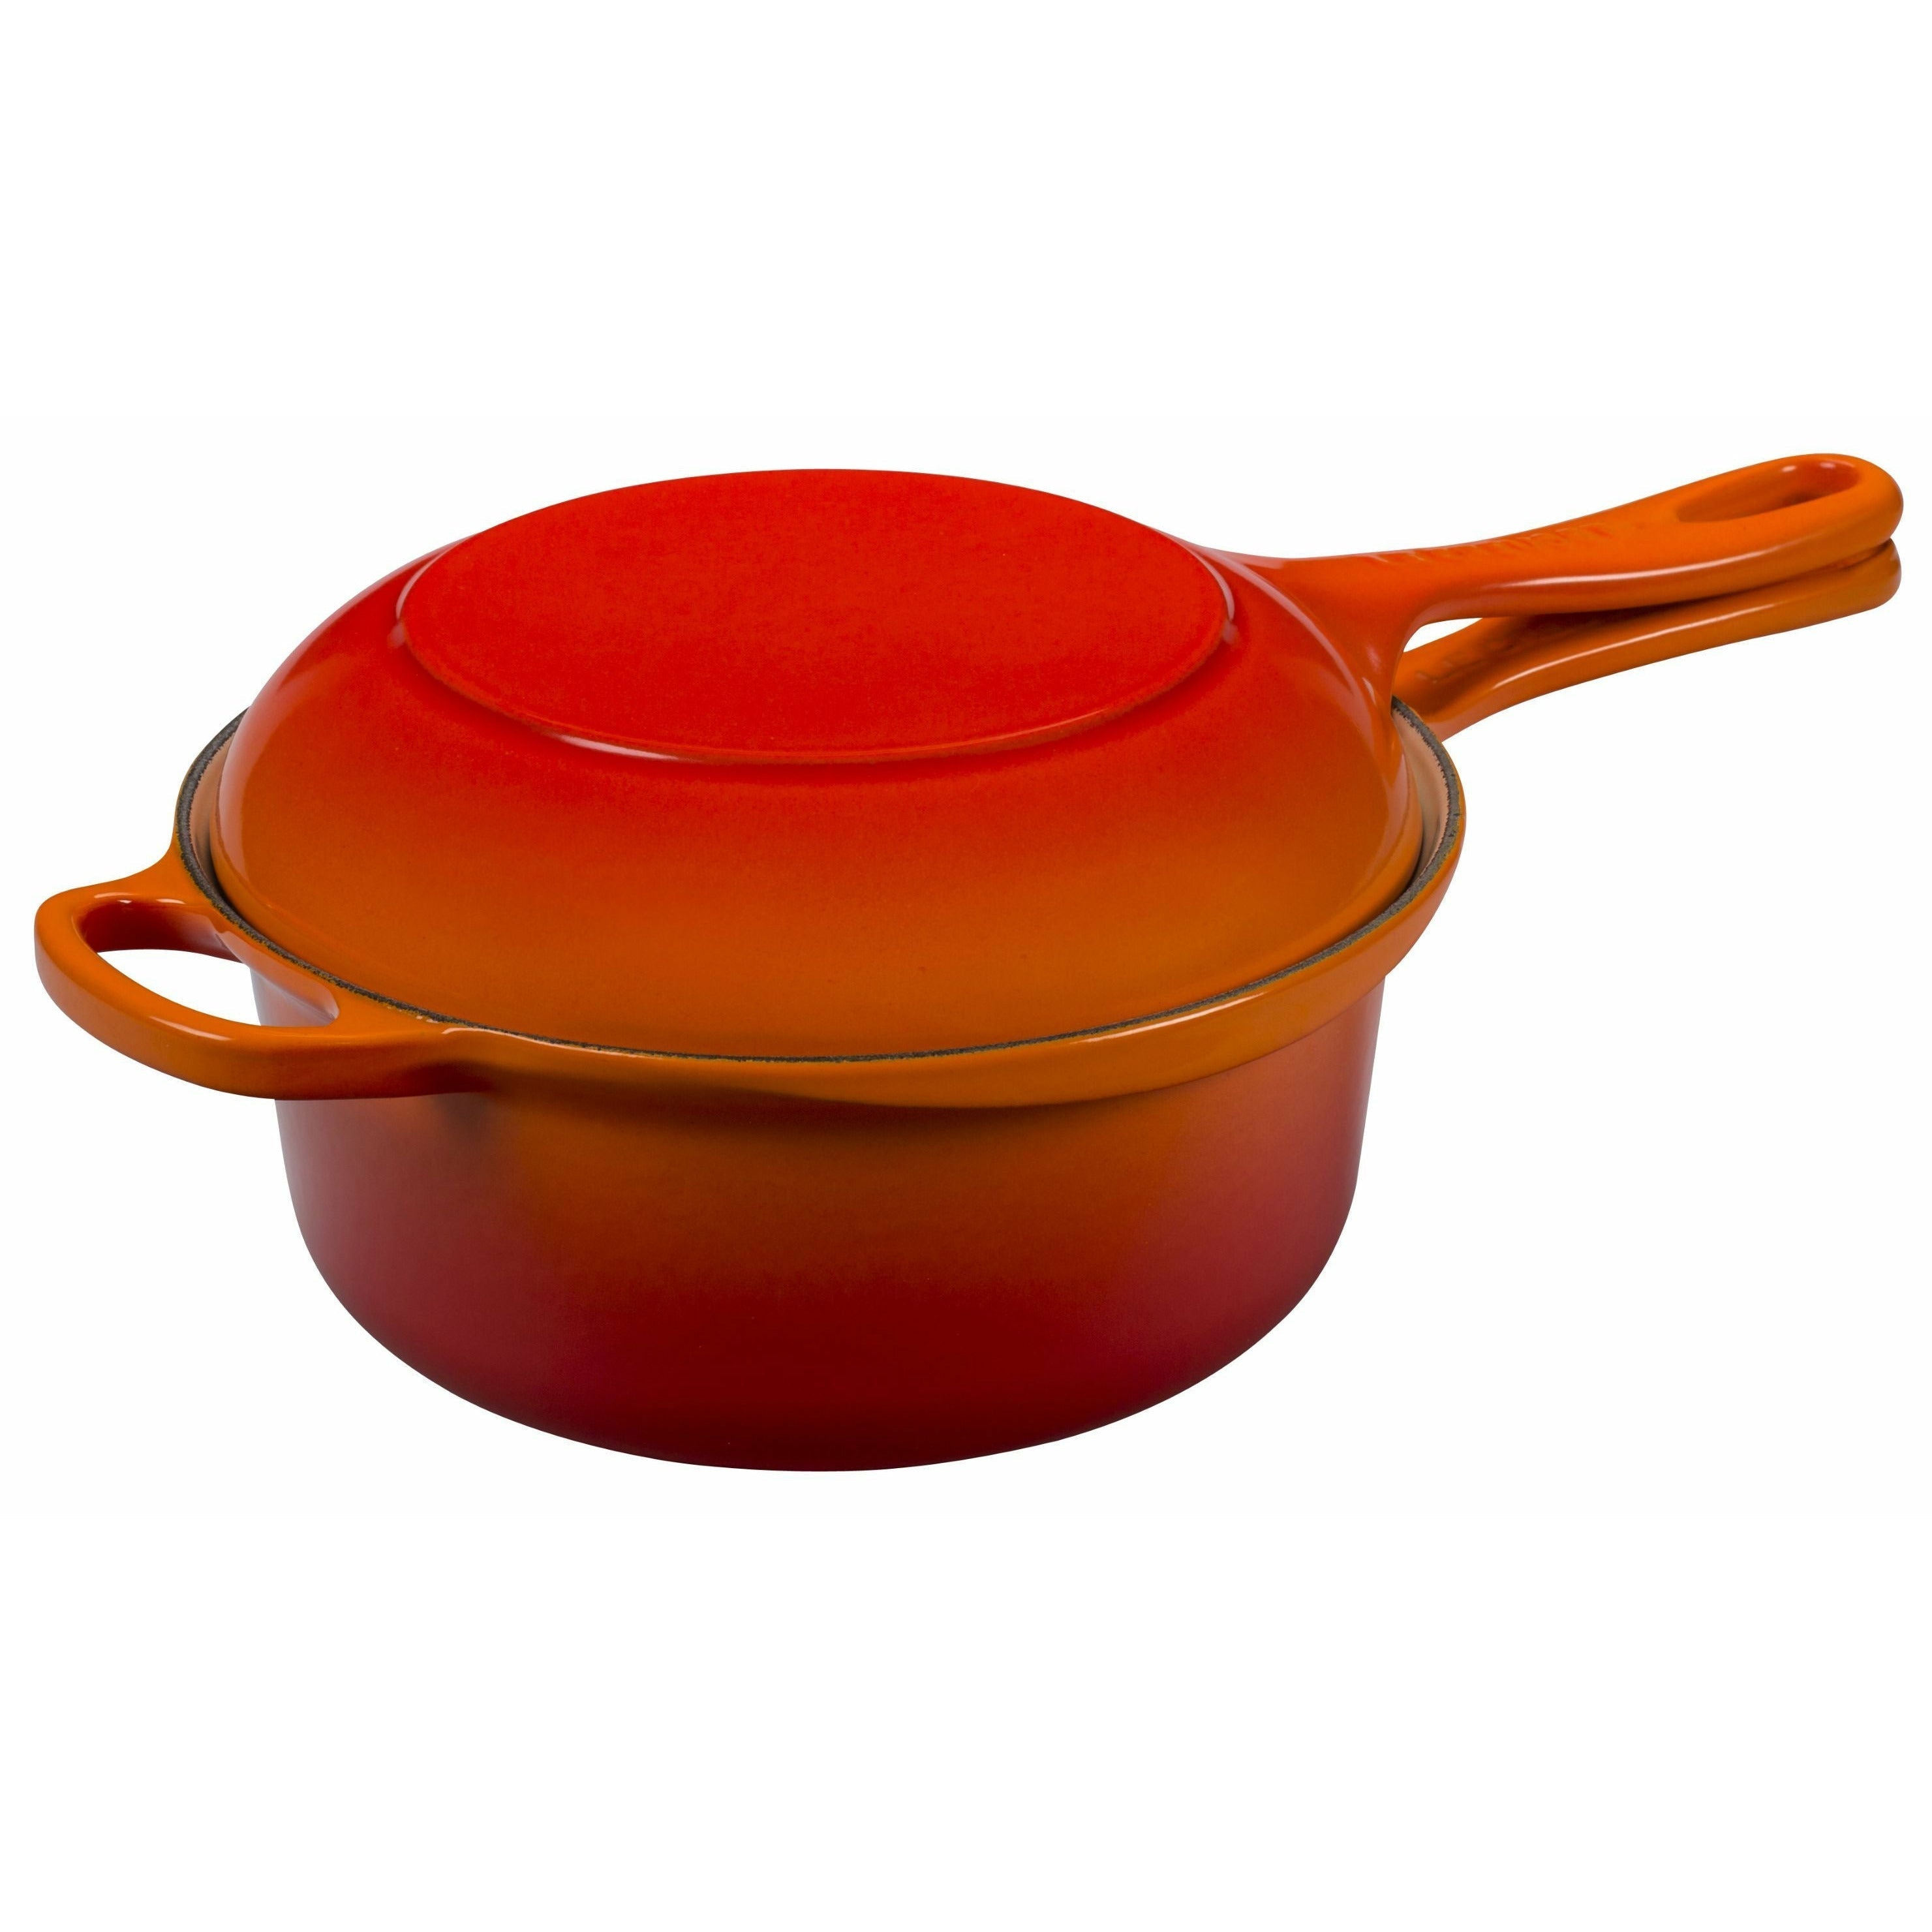 Le Creuset Traditie 2 in 1 marmitout 22 cm, oven rood